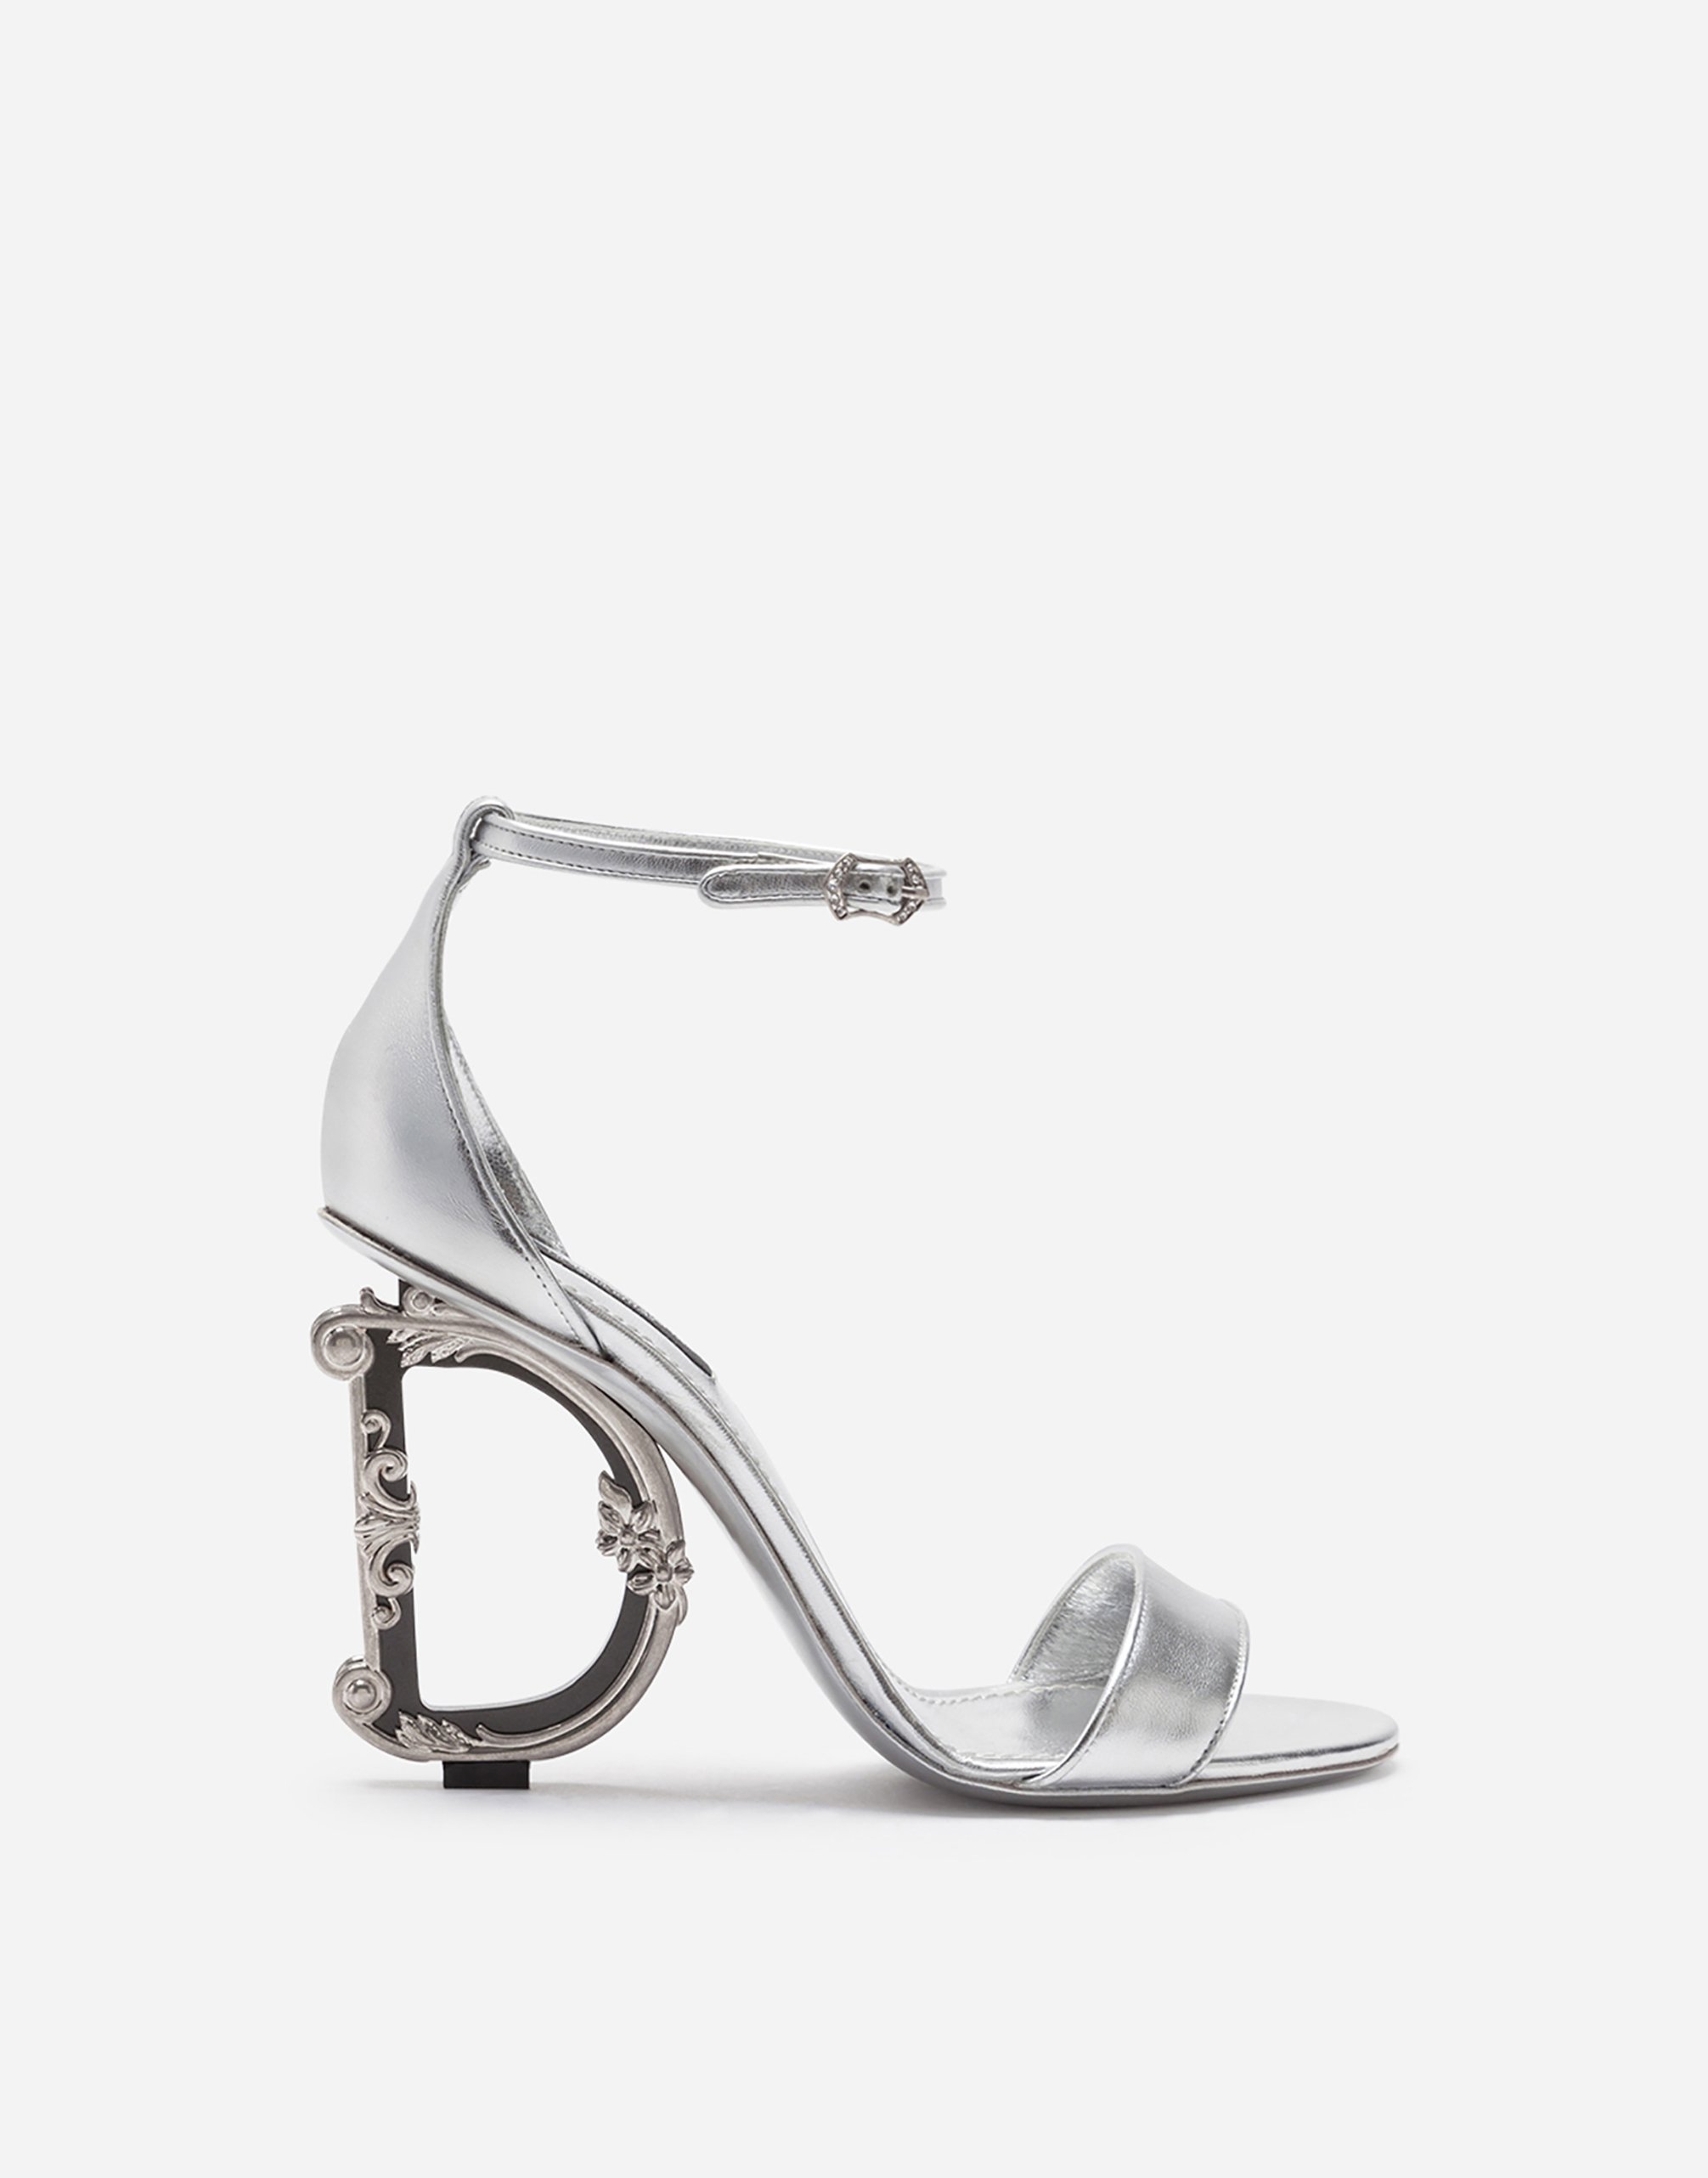 Total 55+ imagen dolce and gabbana silver heels